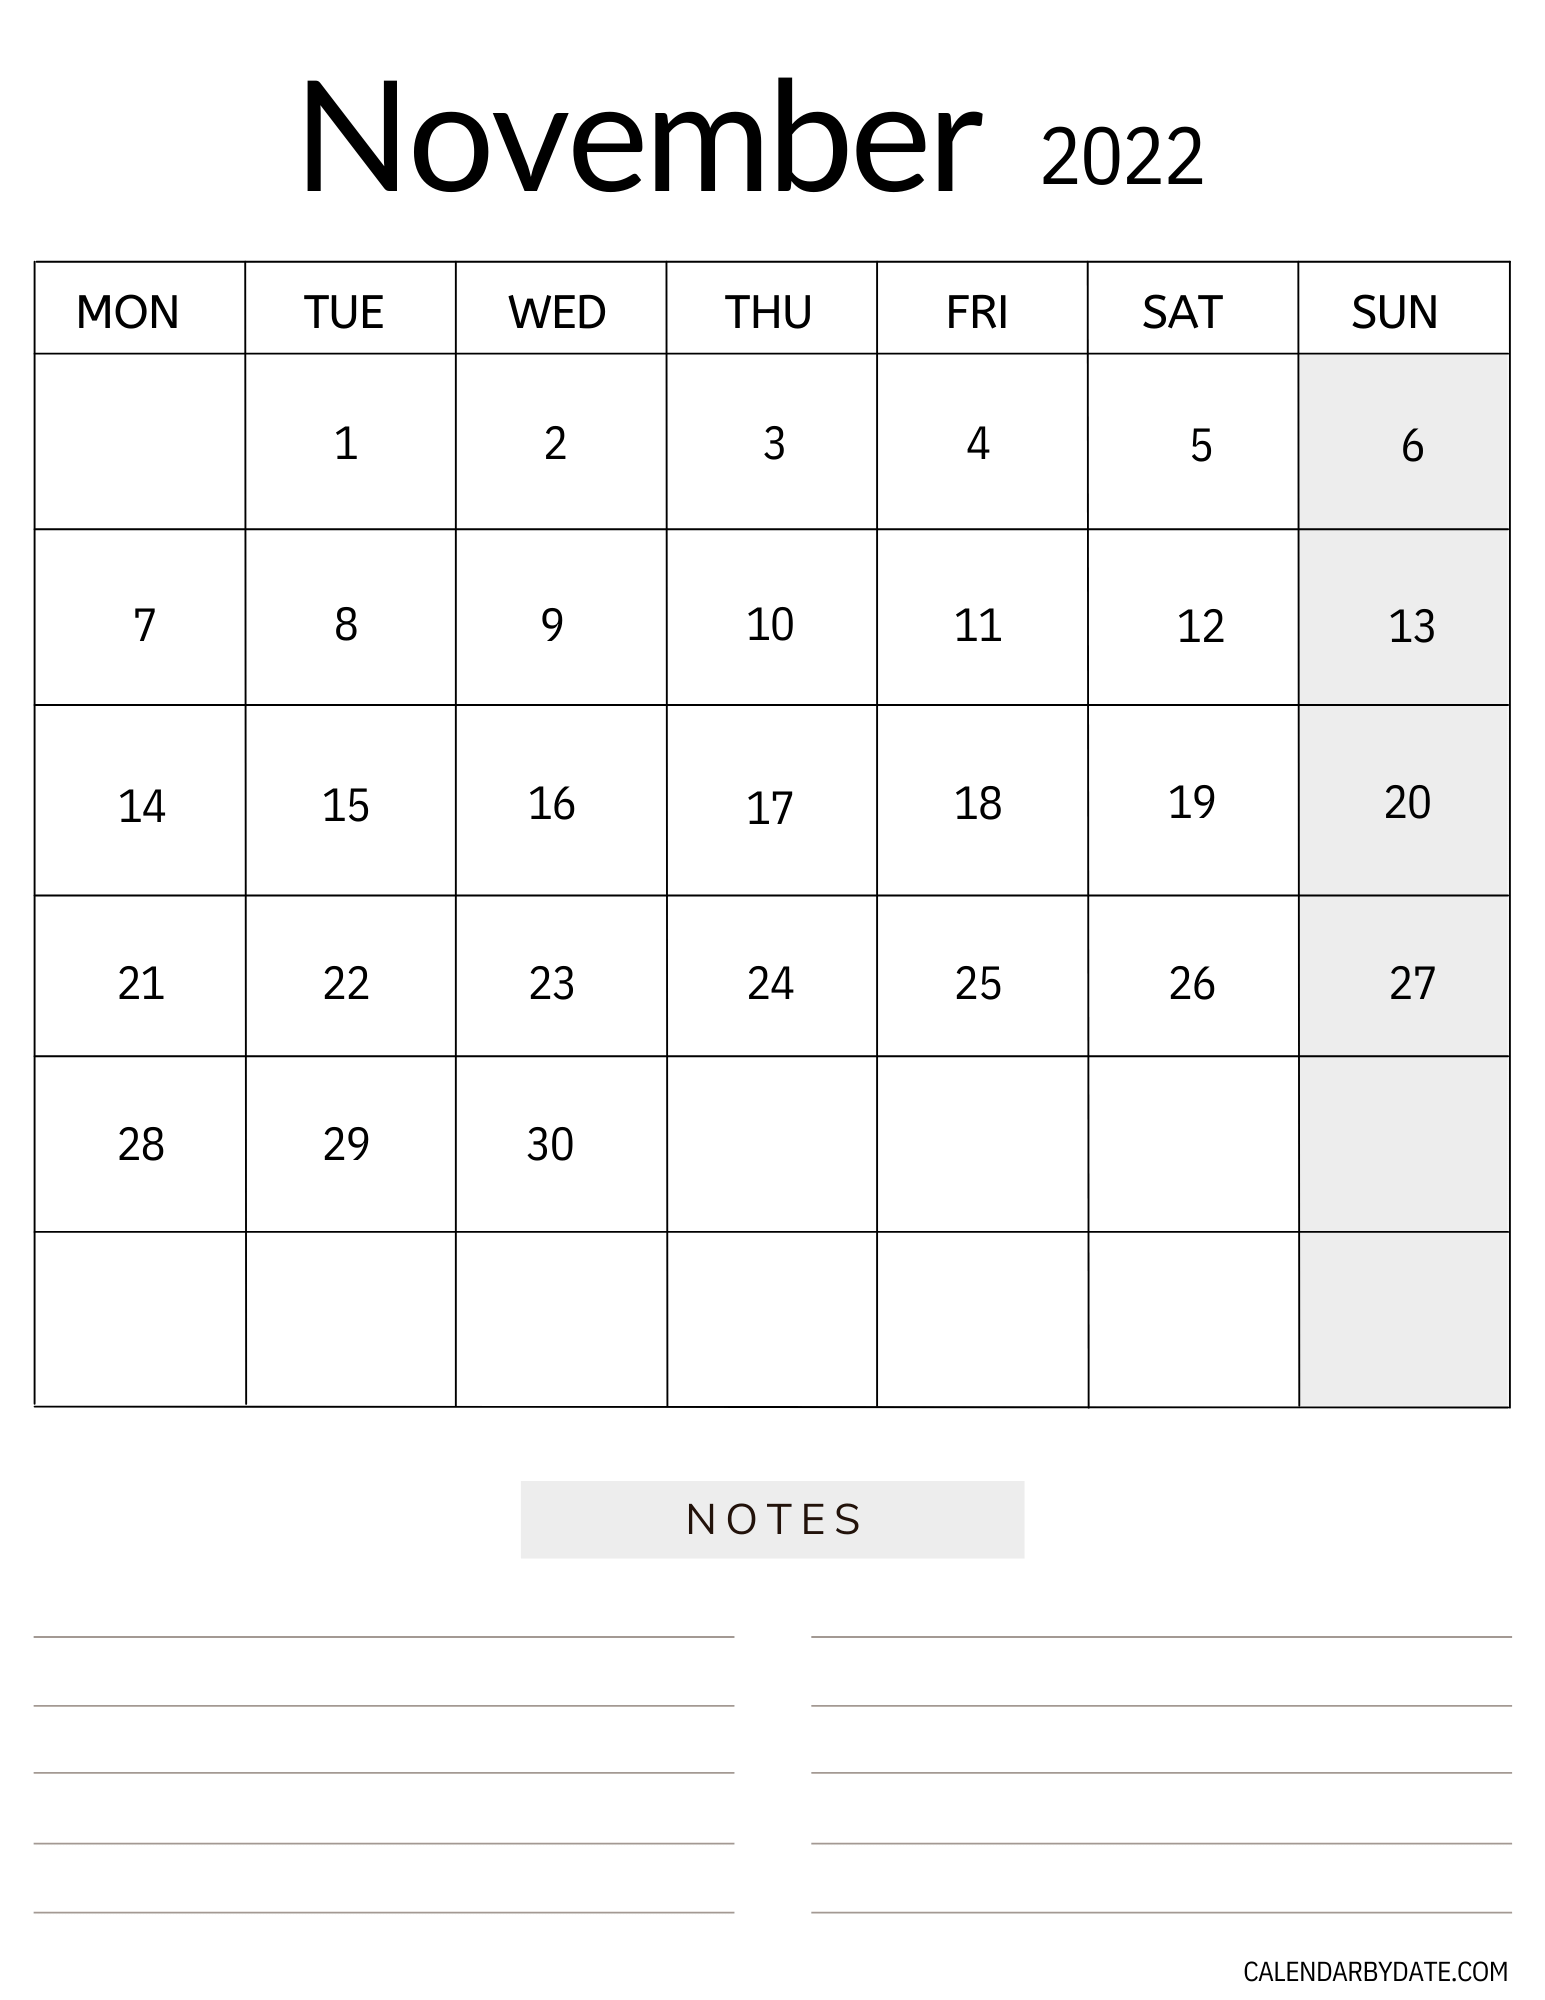 Monthly November 2022 calendar with month name at the top. Template has calendar grid with bold month dates. At the bottom section space is provided to write notes, events and tasks.